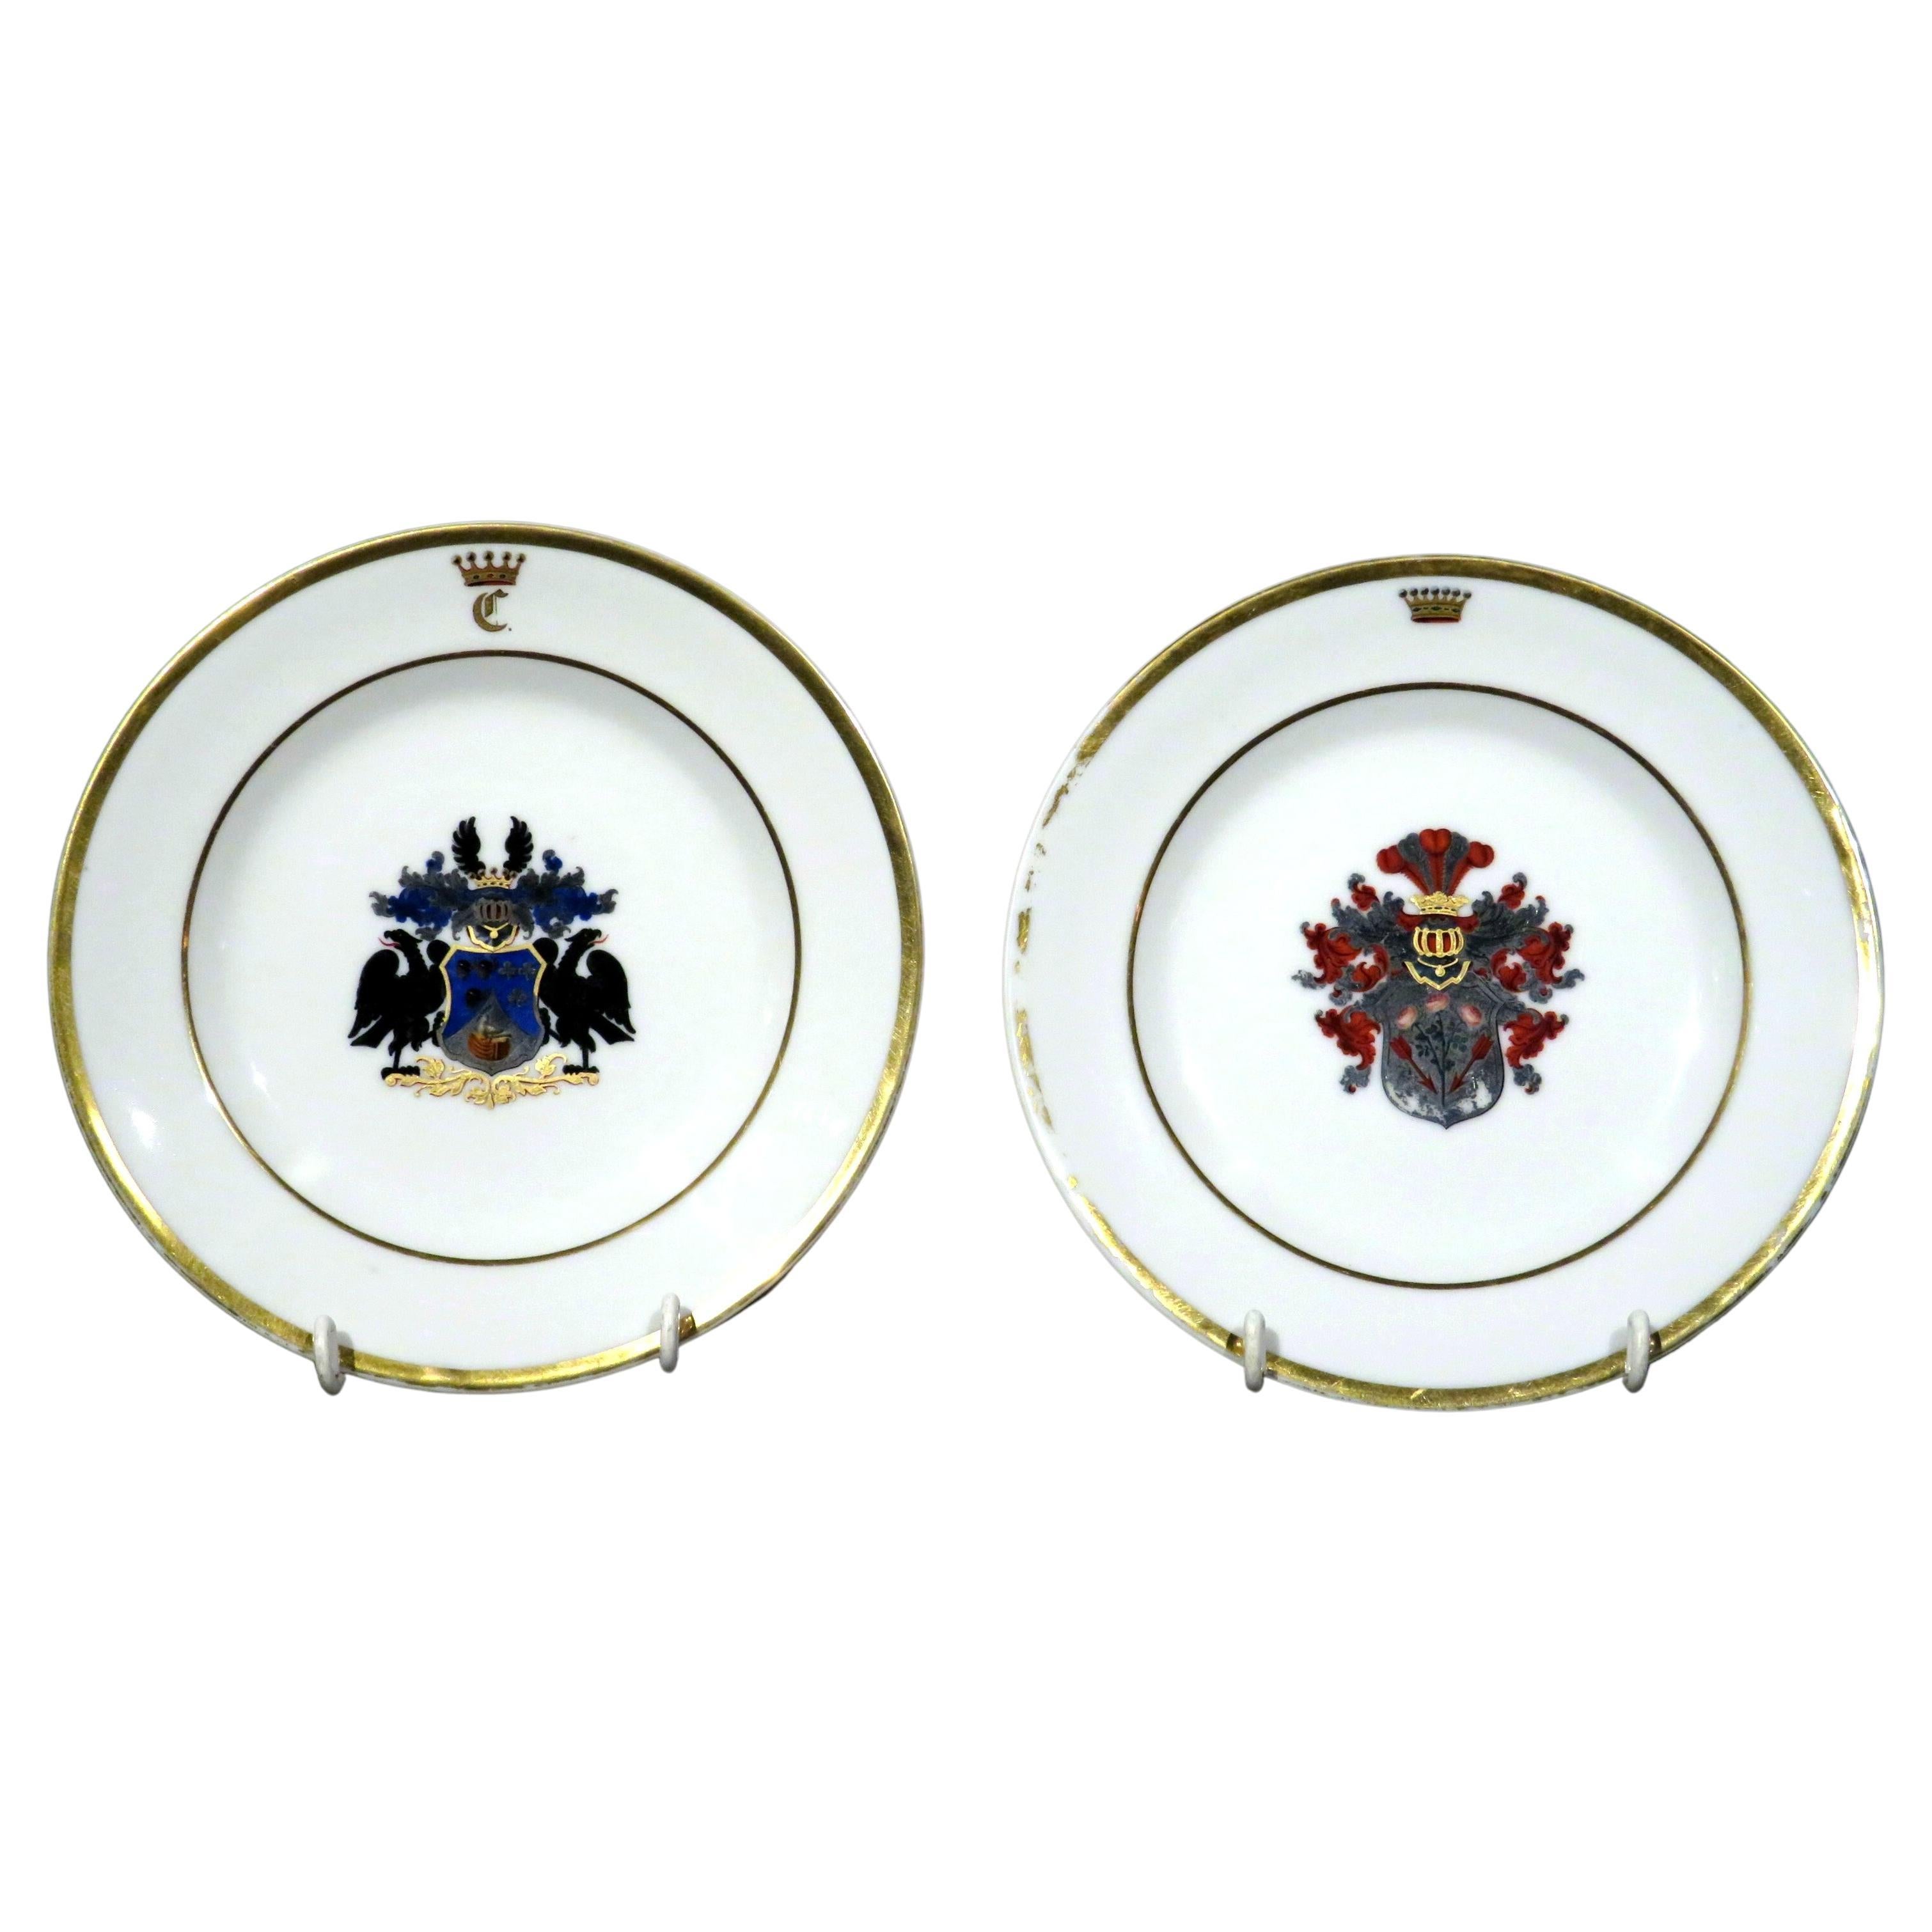 Very Good Pair of 19th Century German Porcelain Cabinet Plates, Dated Bonn 1853